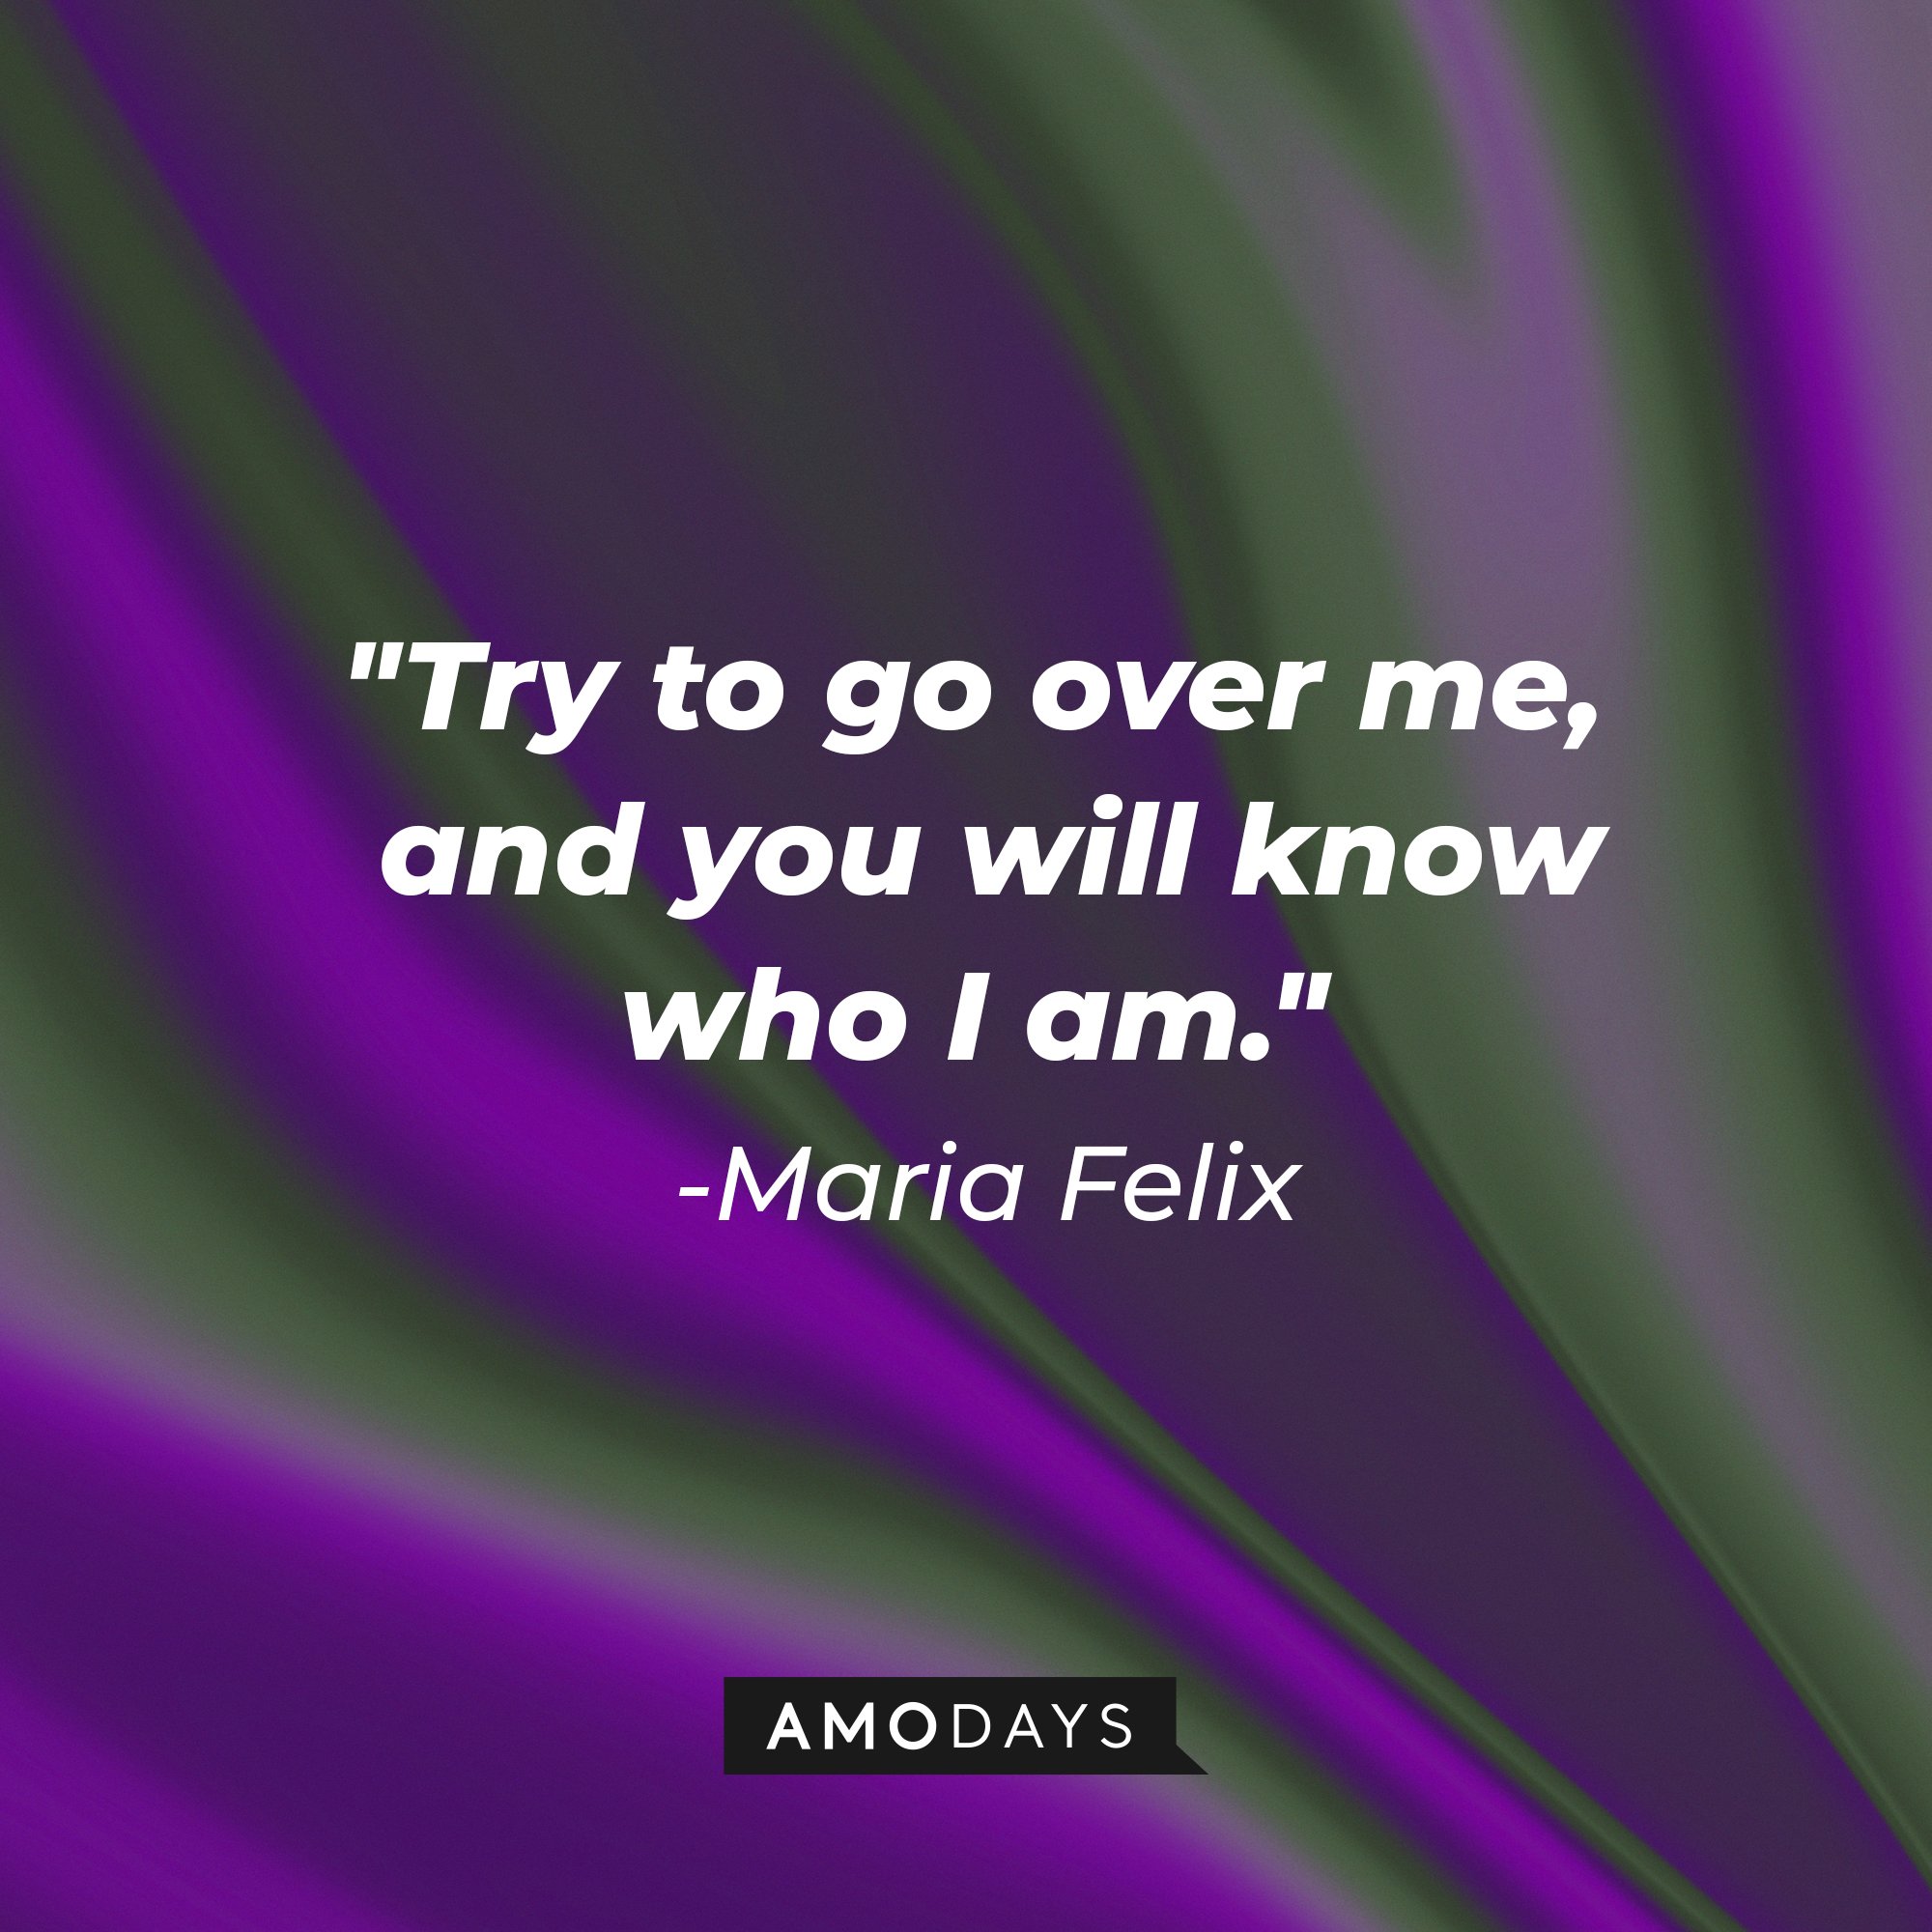 Maria Felix's quote: "Try to go over me, and you will know who I am." | Image: AmoDays